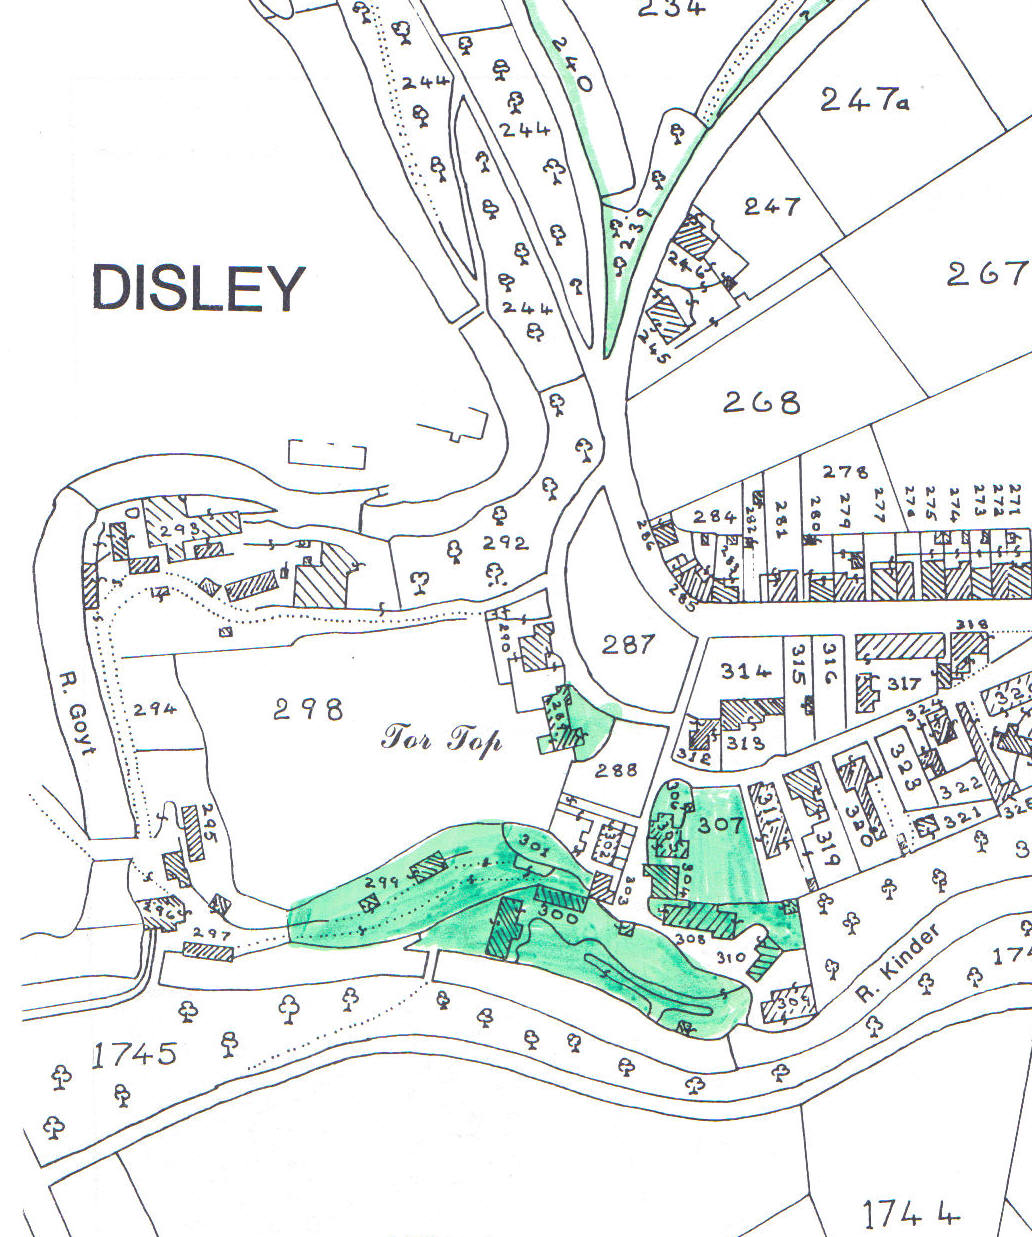 Barnes family holdings in the town centre (in green)